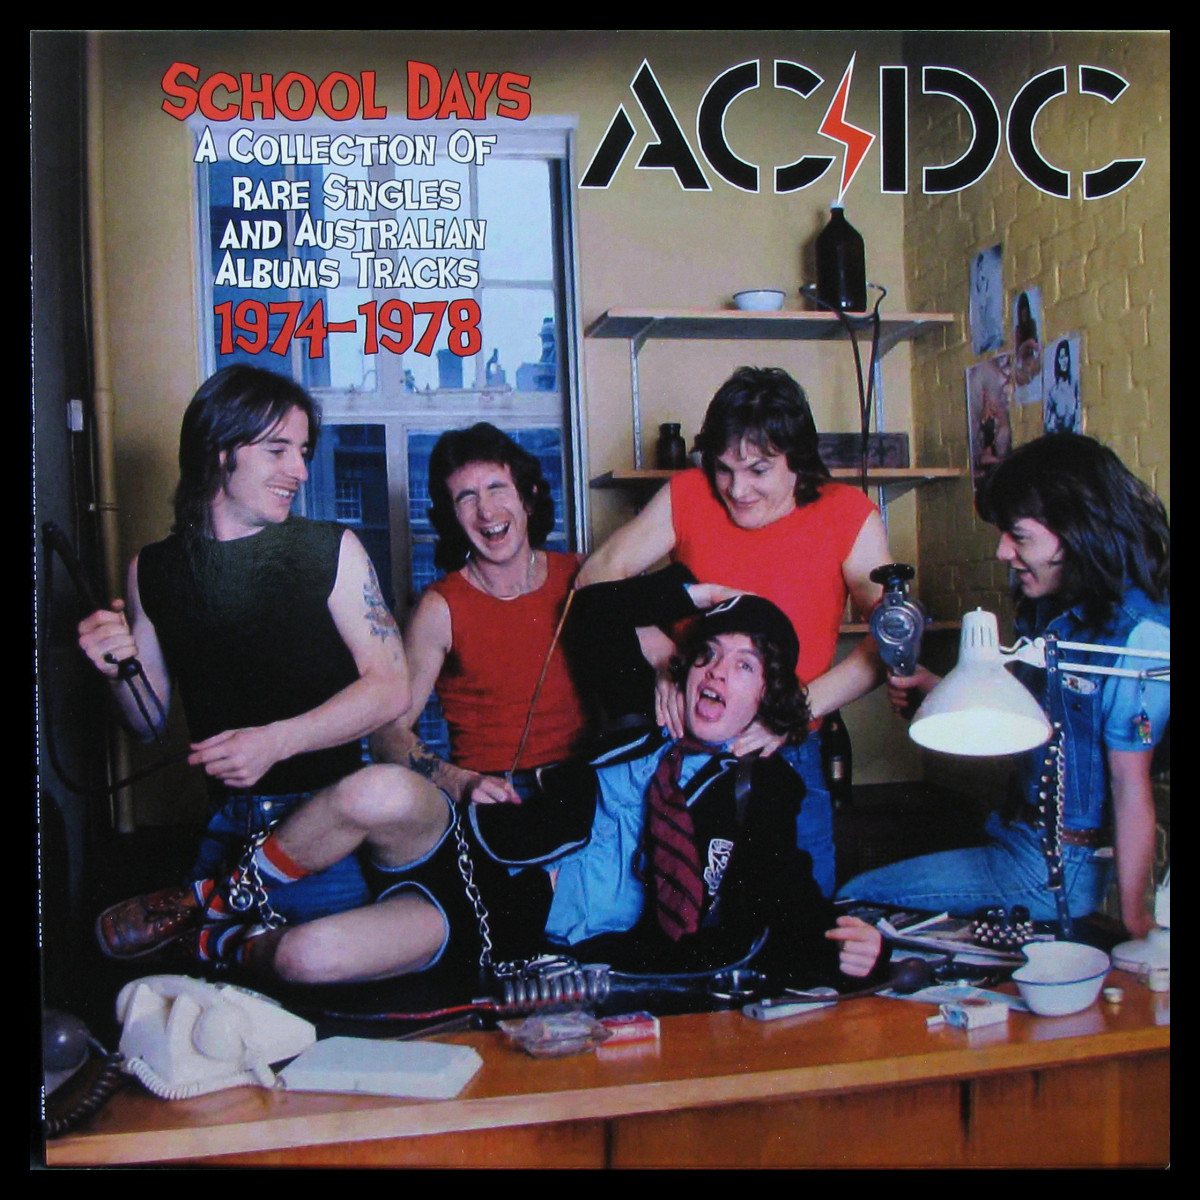 School Days - A Collection Of Rare Singles And Australian Albums Tracks 1974-1978